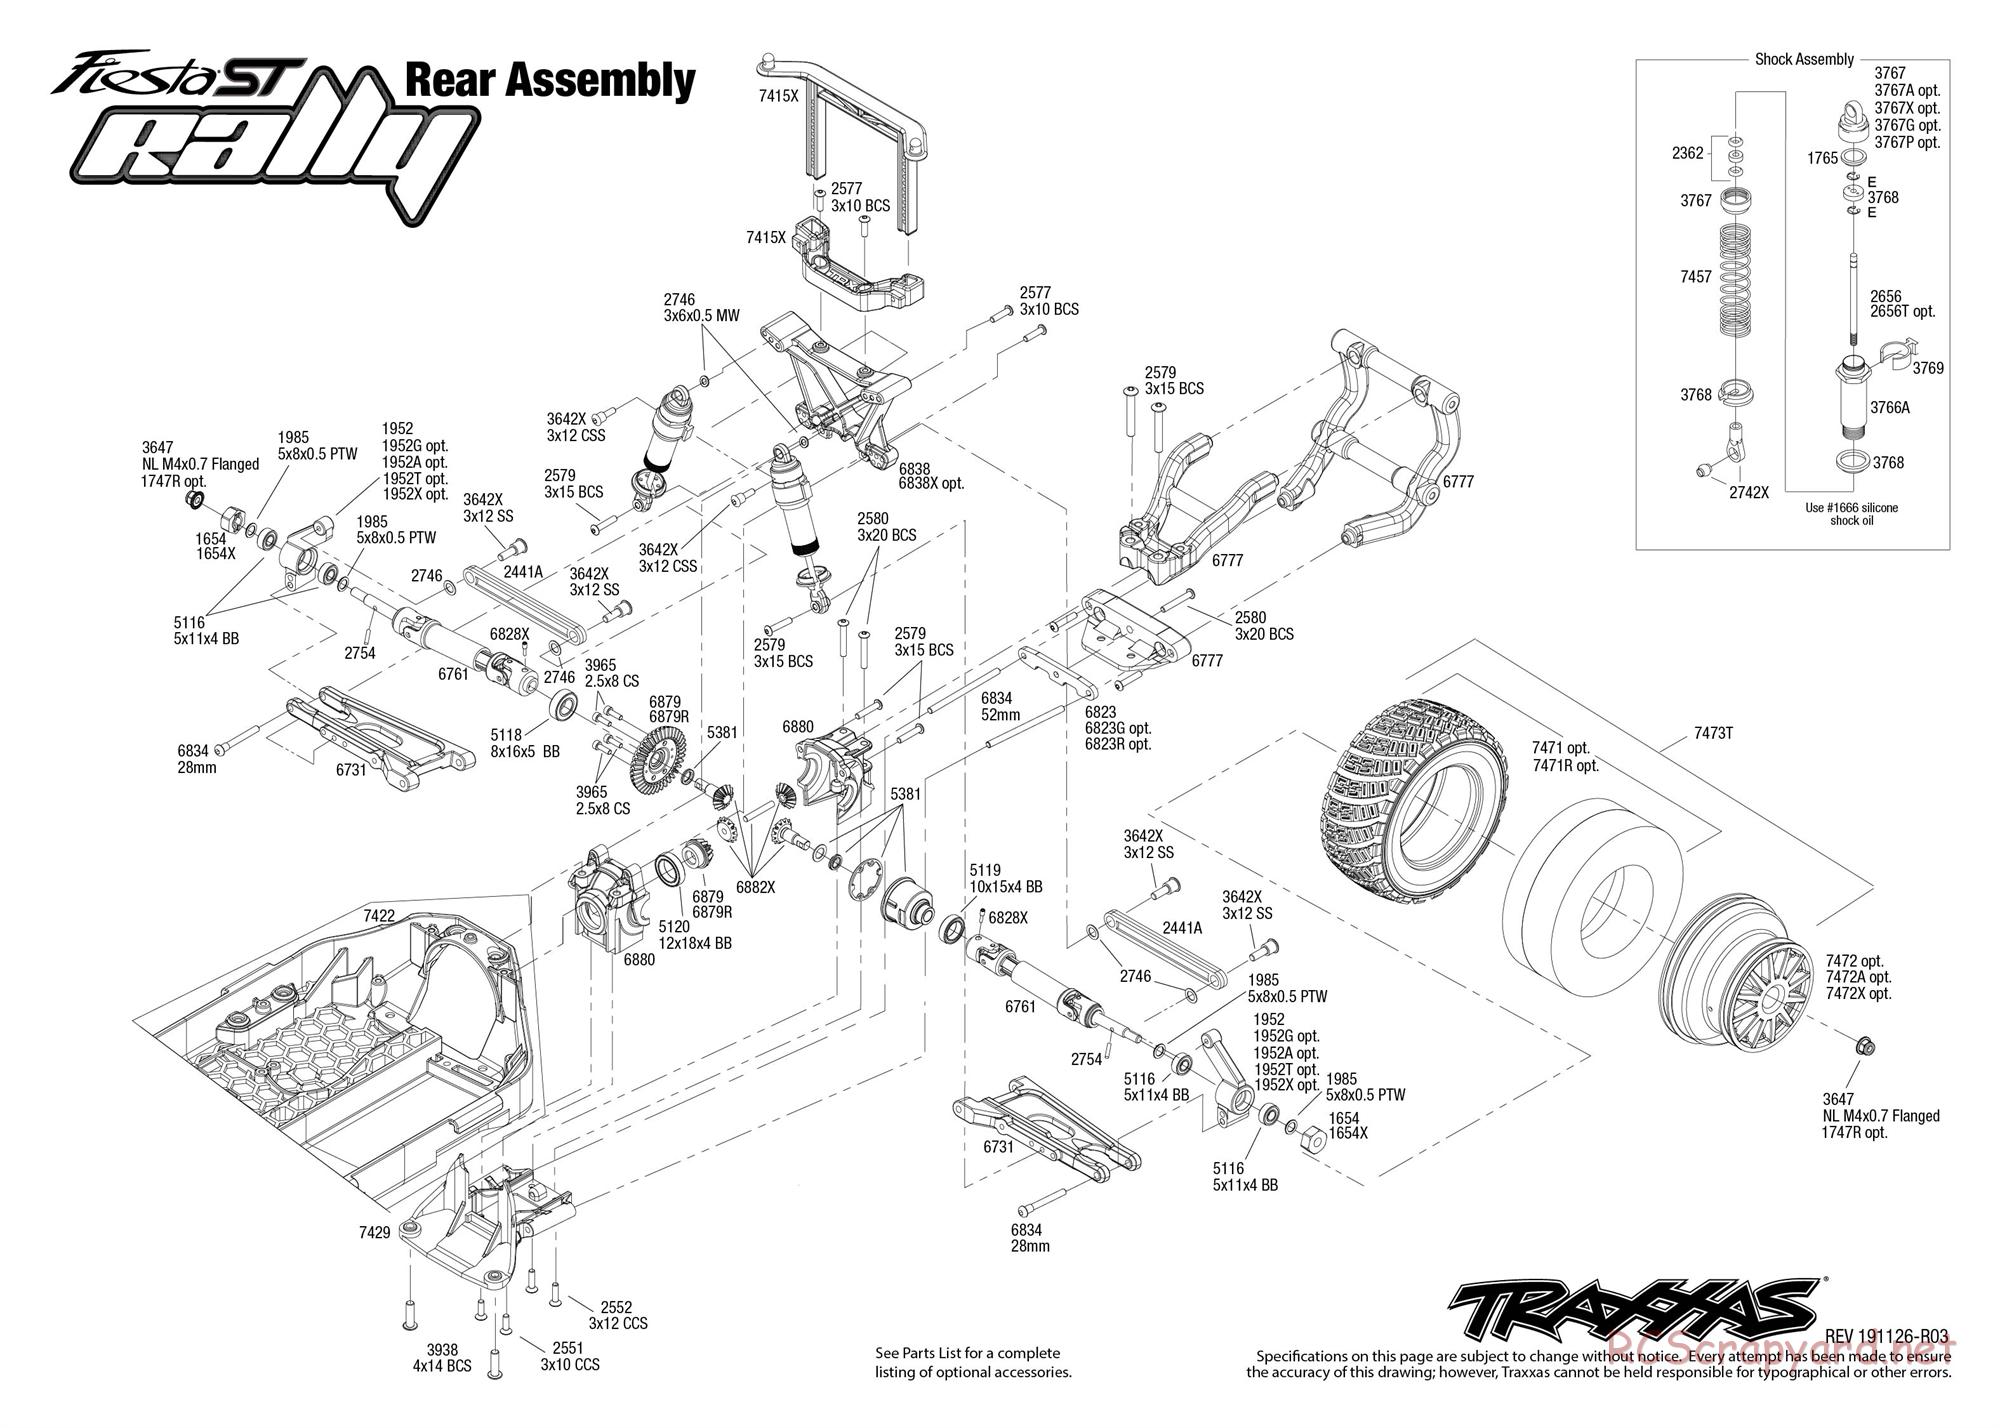 Traxxas - VR46 Ford Fiesta ST Rally SE (2018) - Exploded Views - Page 4